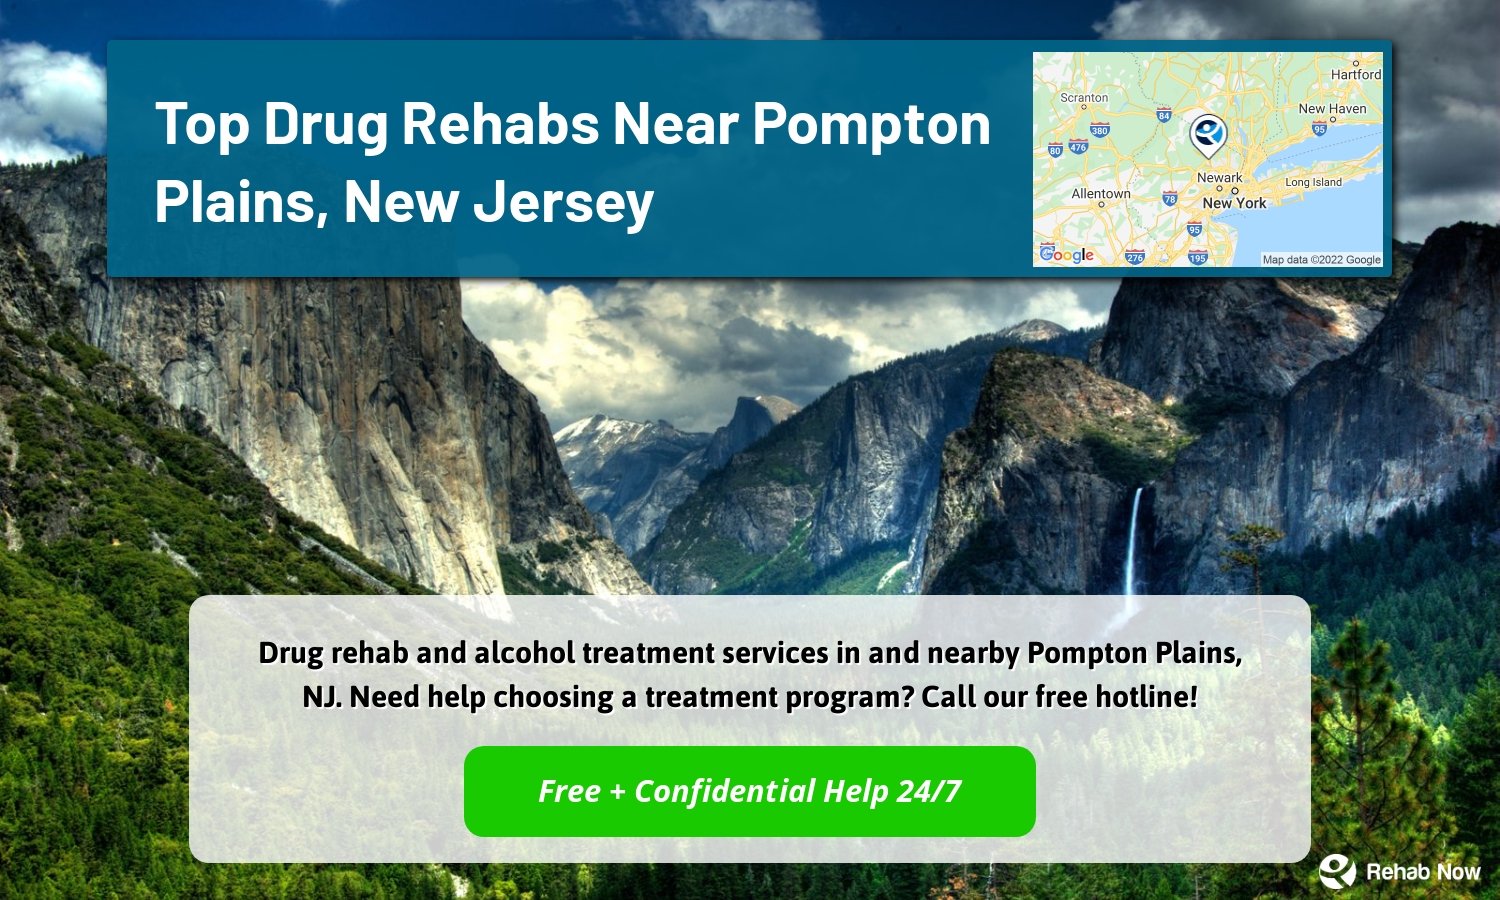 Drug rehab and alcohol treatment services in and nearby Pompton Plains, NJ. Need help choosing a treatment program? Call our free hotline!